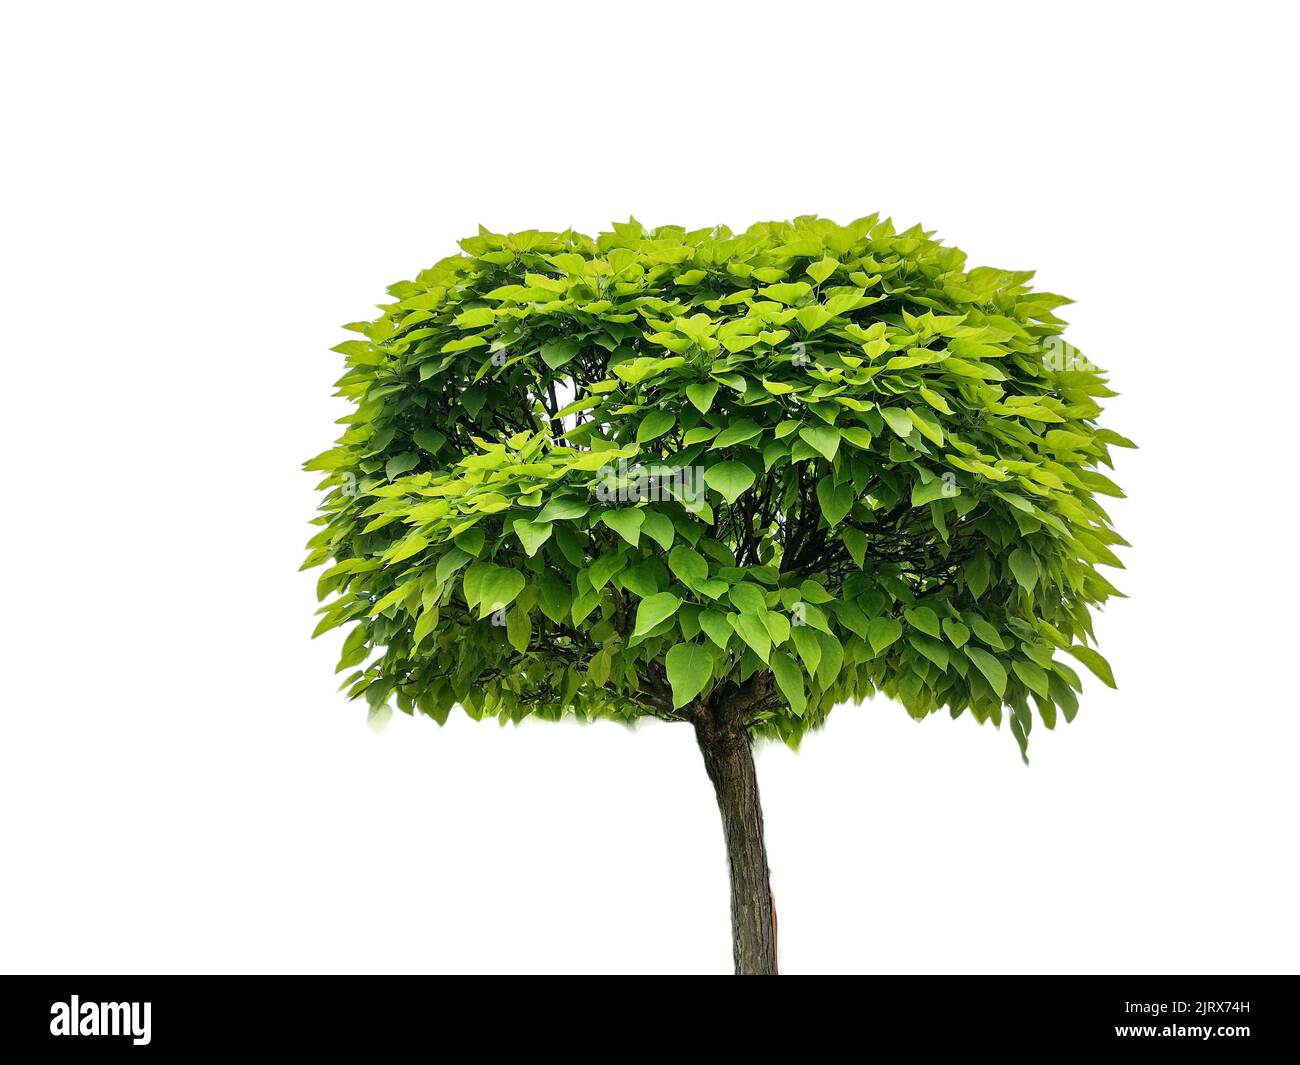 The close-up view of a catalpas tree isolated on the white background Stock Photo